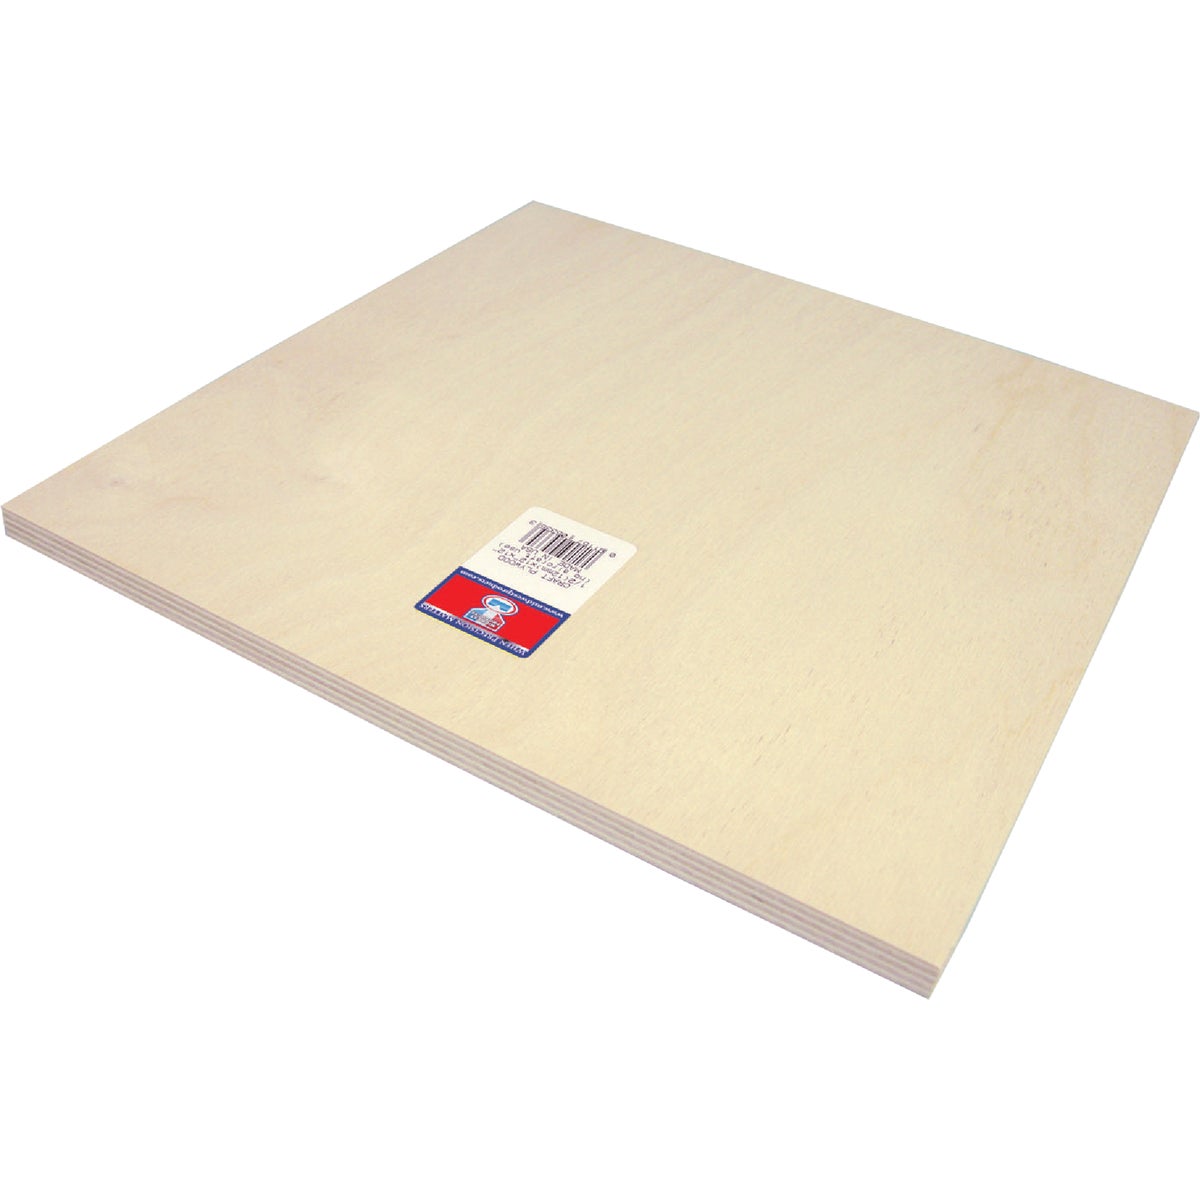 Midwest Products 1/2 In. x 12 In. x 12 In. Birch Plywood